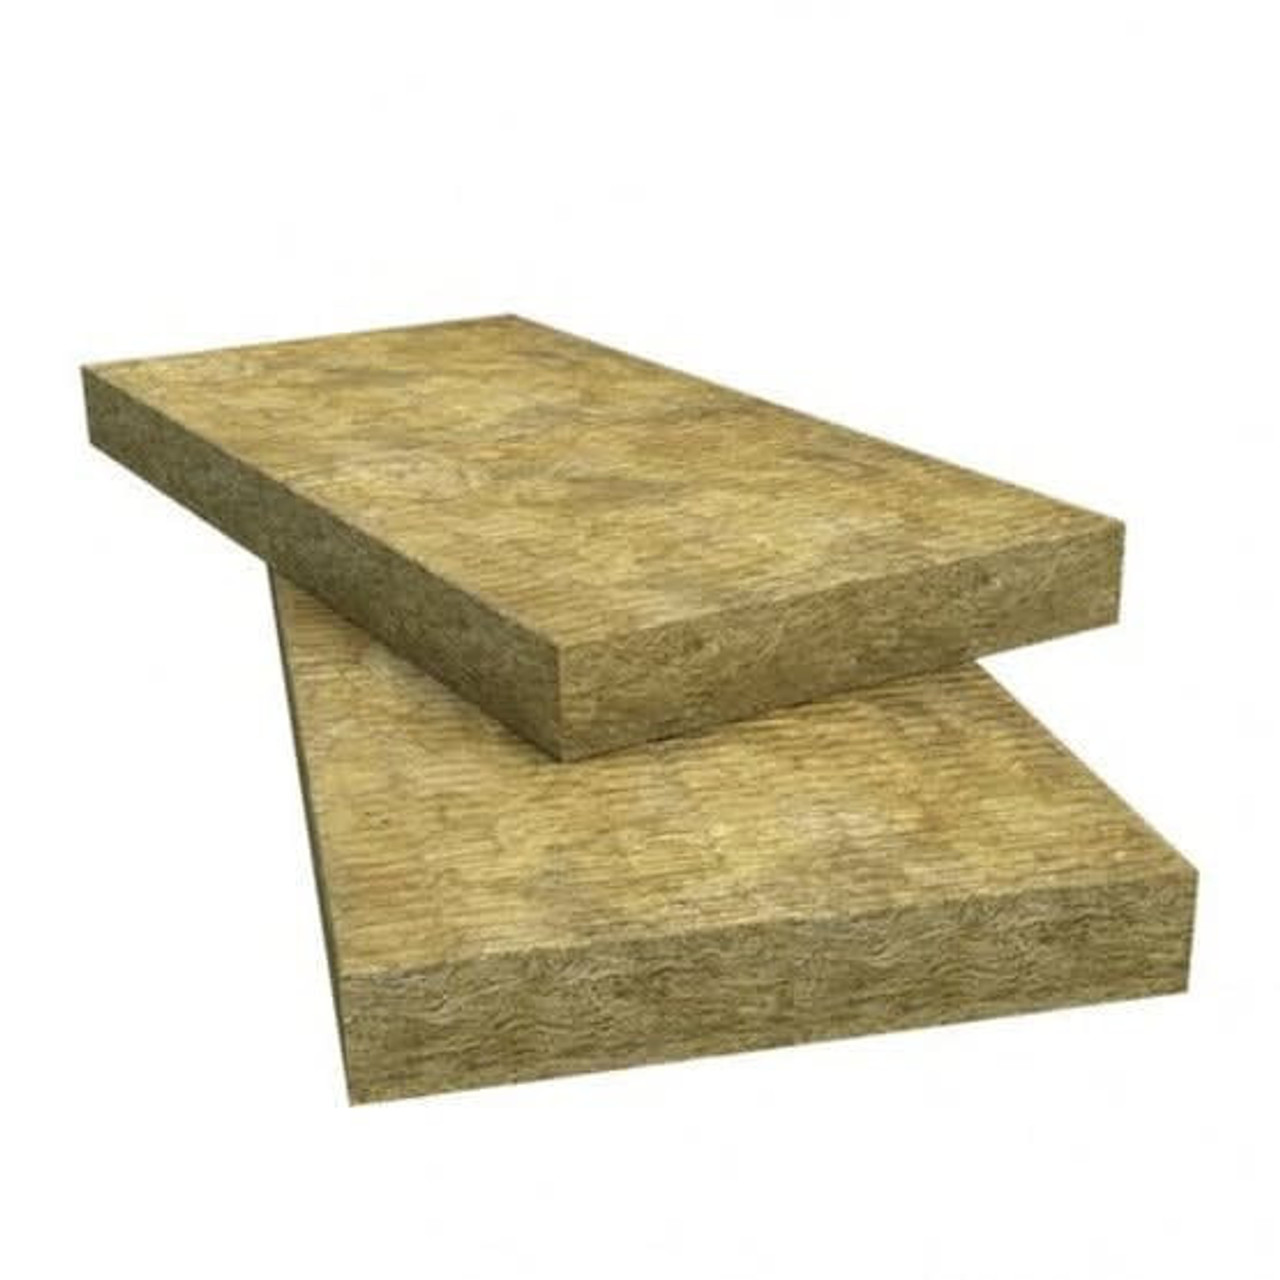 100mm Rockwool RW3 - Pro Rox- SL930- Acoustic Sound Thermal Fire Insulation Slab ( 2.88m2 Pack - 4 Slabs - 60kg m3 181186 RKW-61348-1